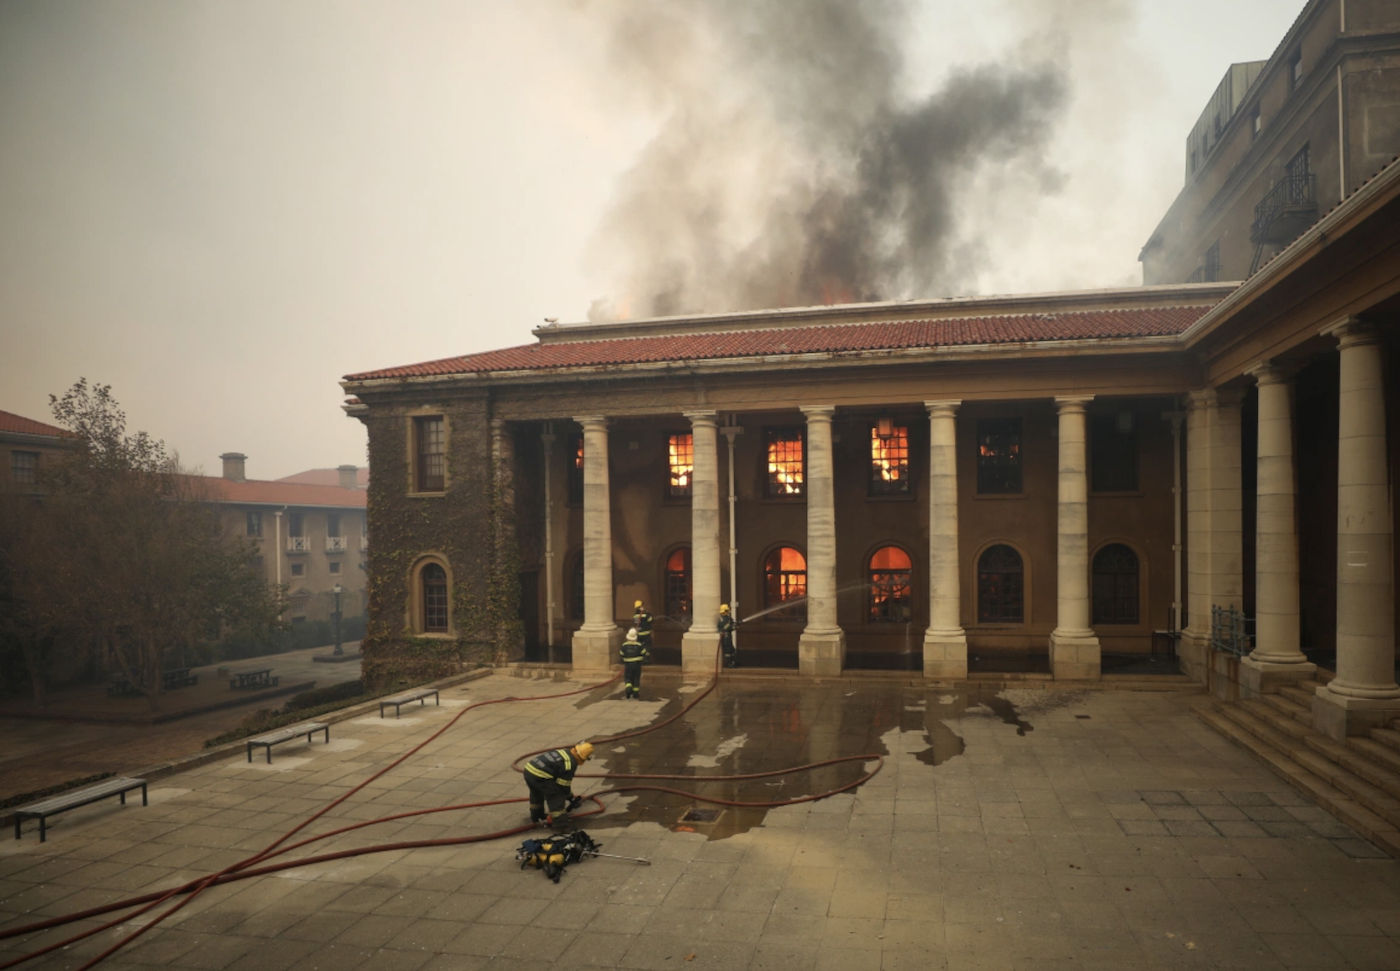 An image of Jagger Library at the University of Cape Town on fire.